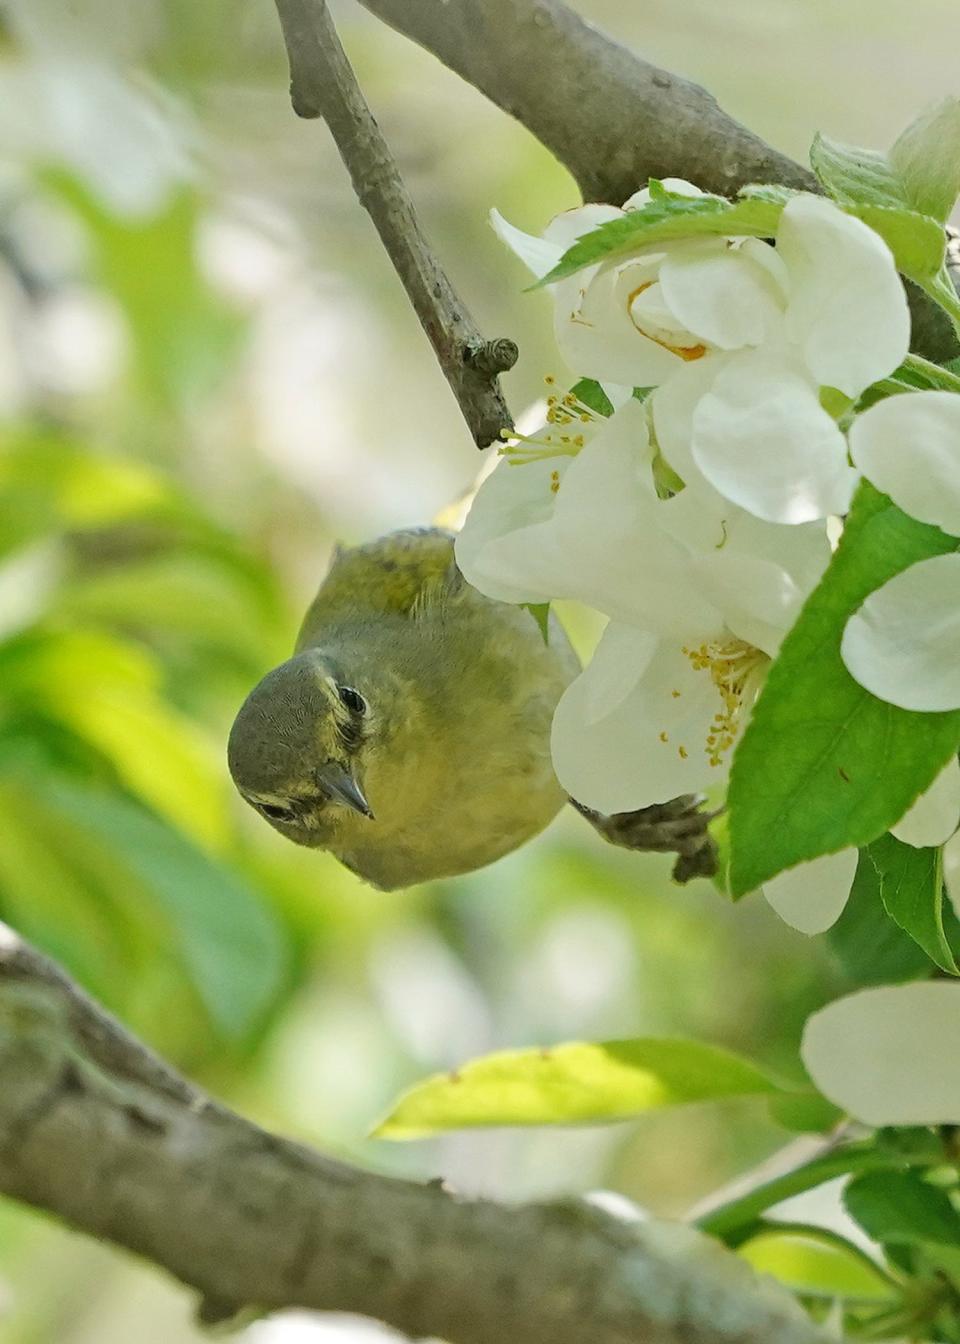 A Tennessee warbler snacks on insects in a flowering tree.